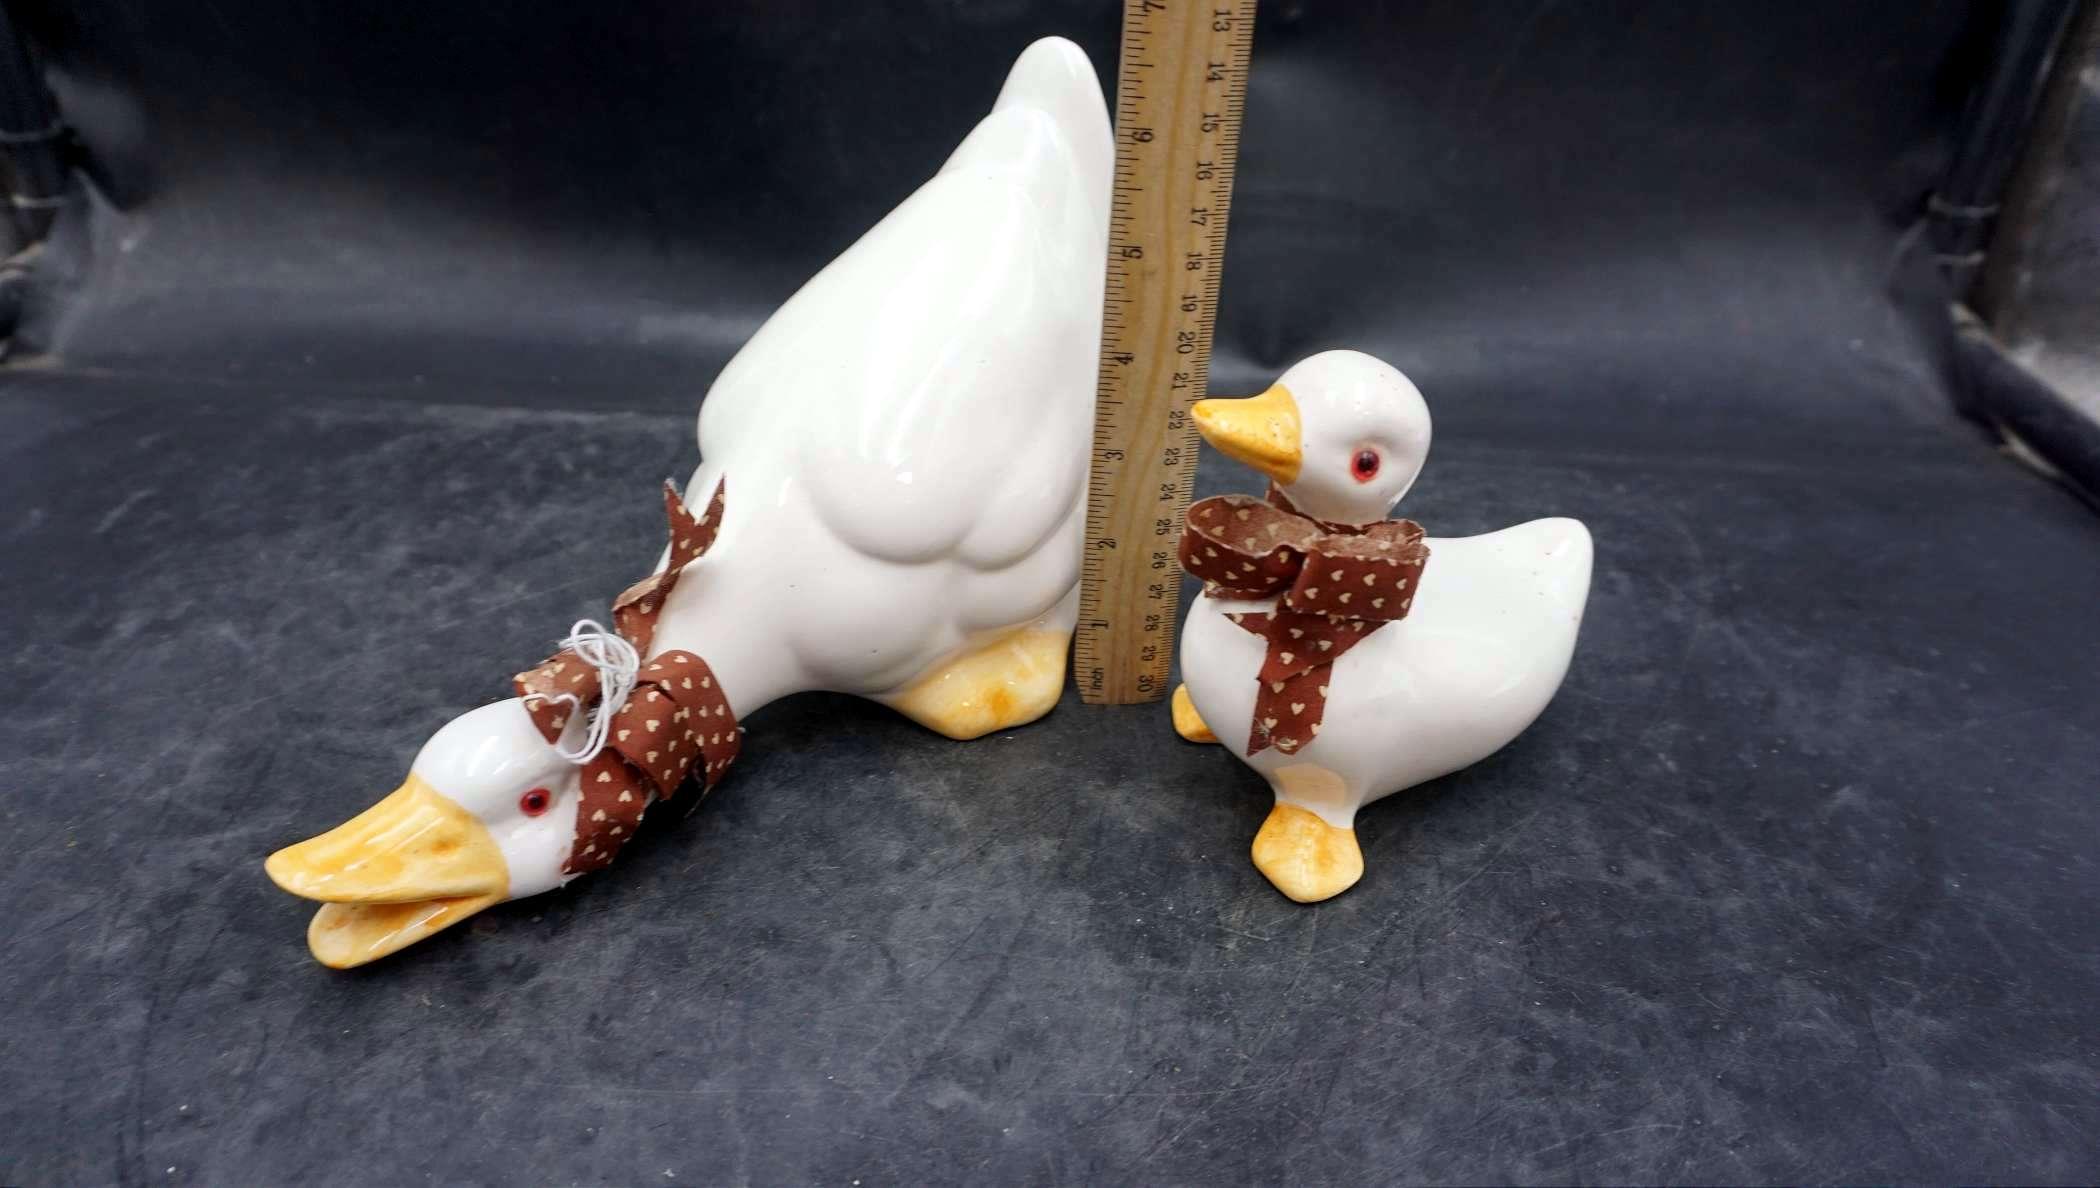 Goose Figurines, Rolling Pin, String Lights